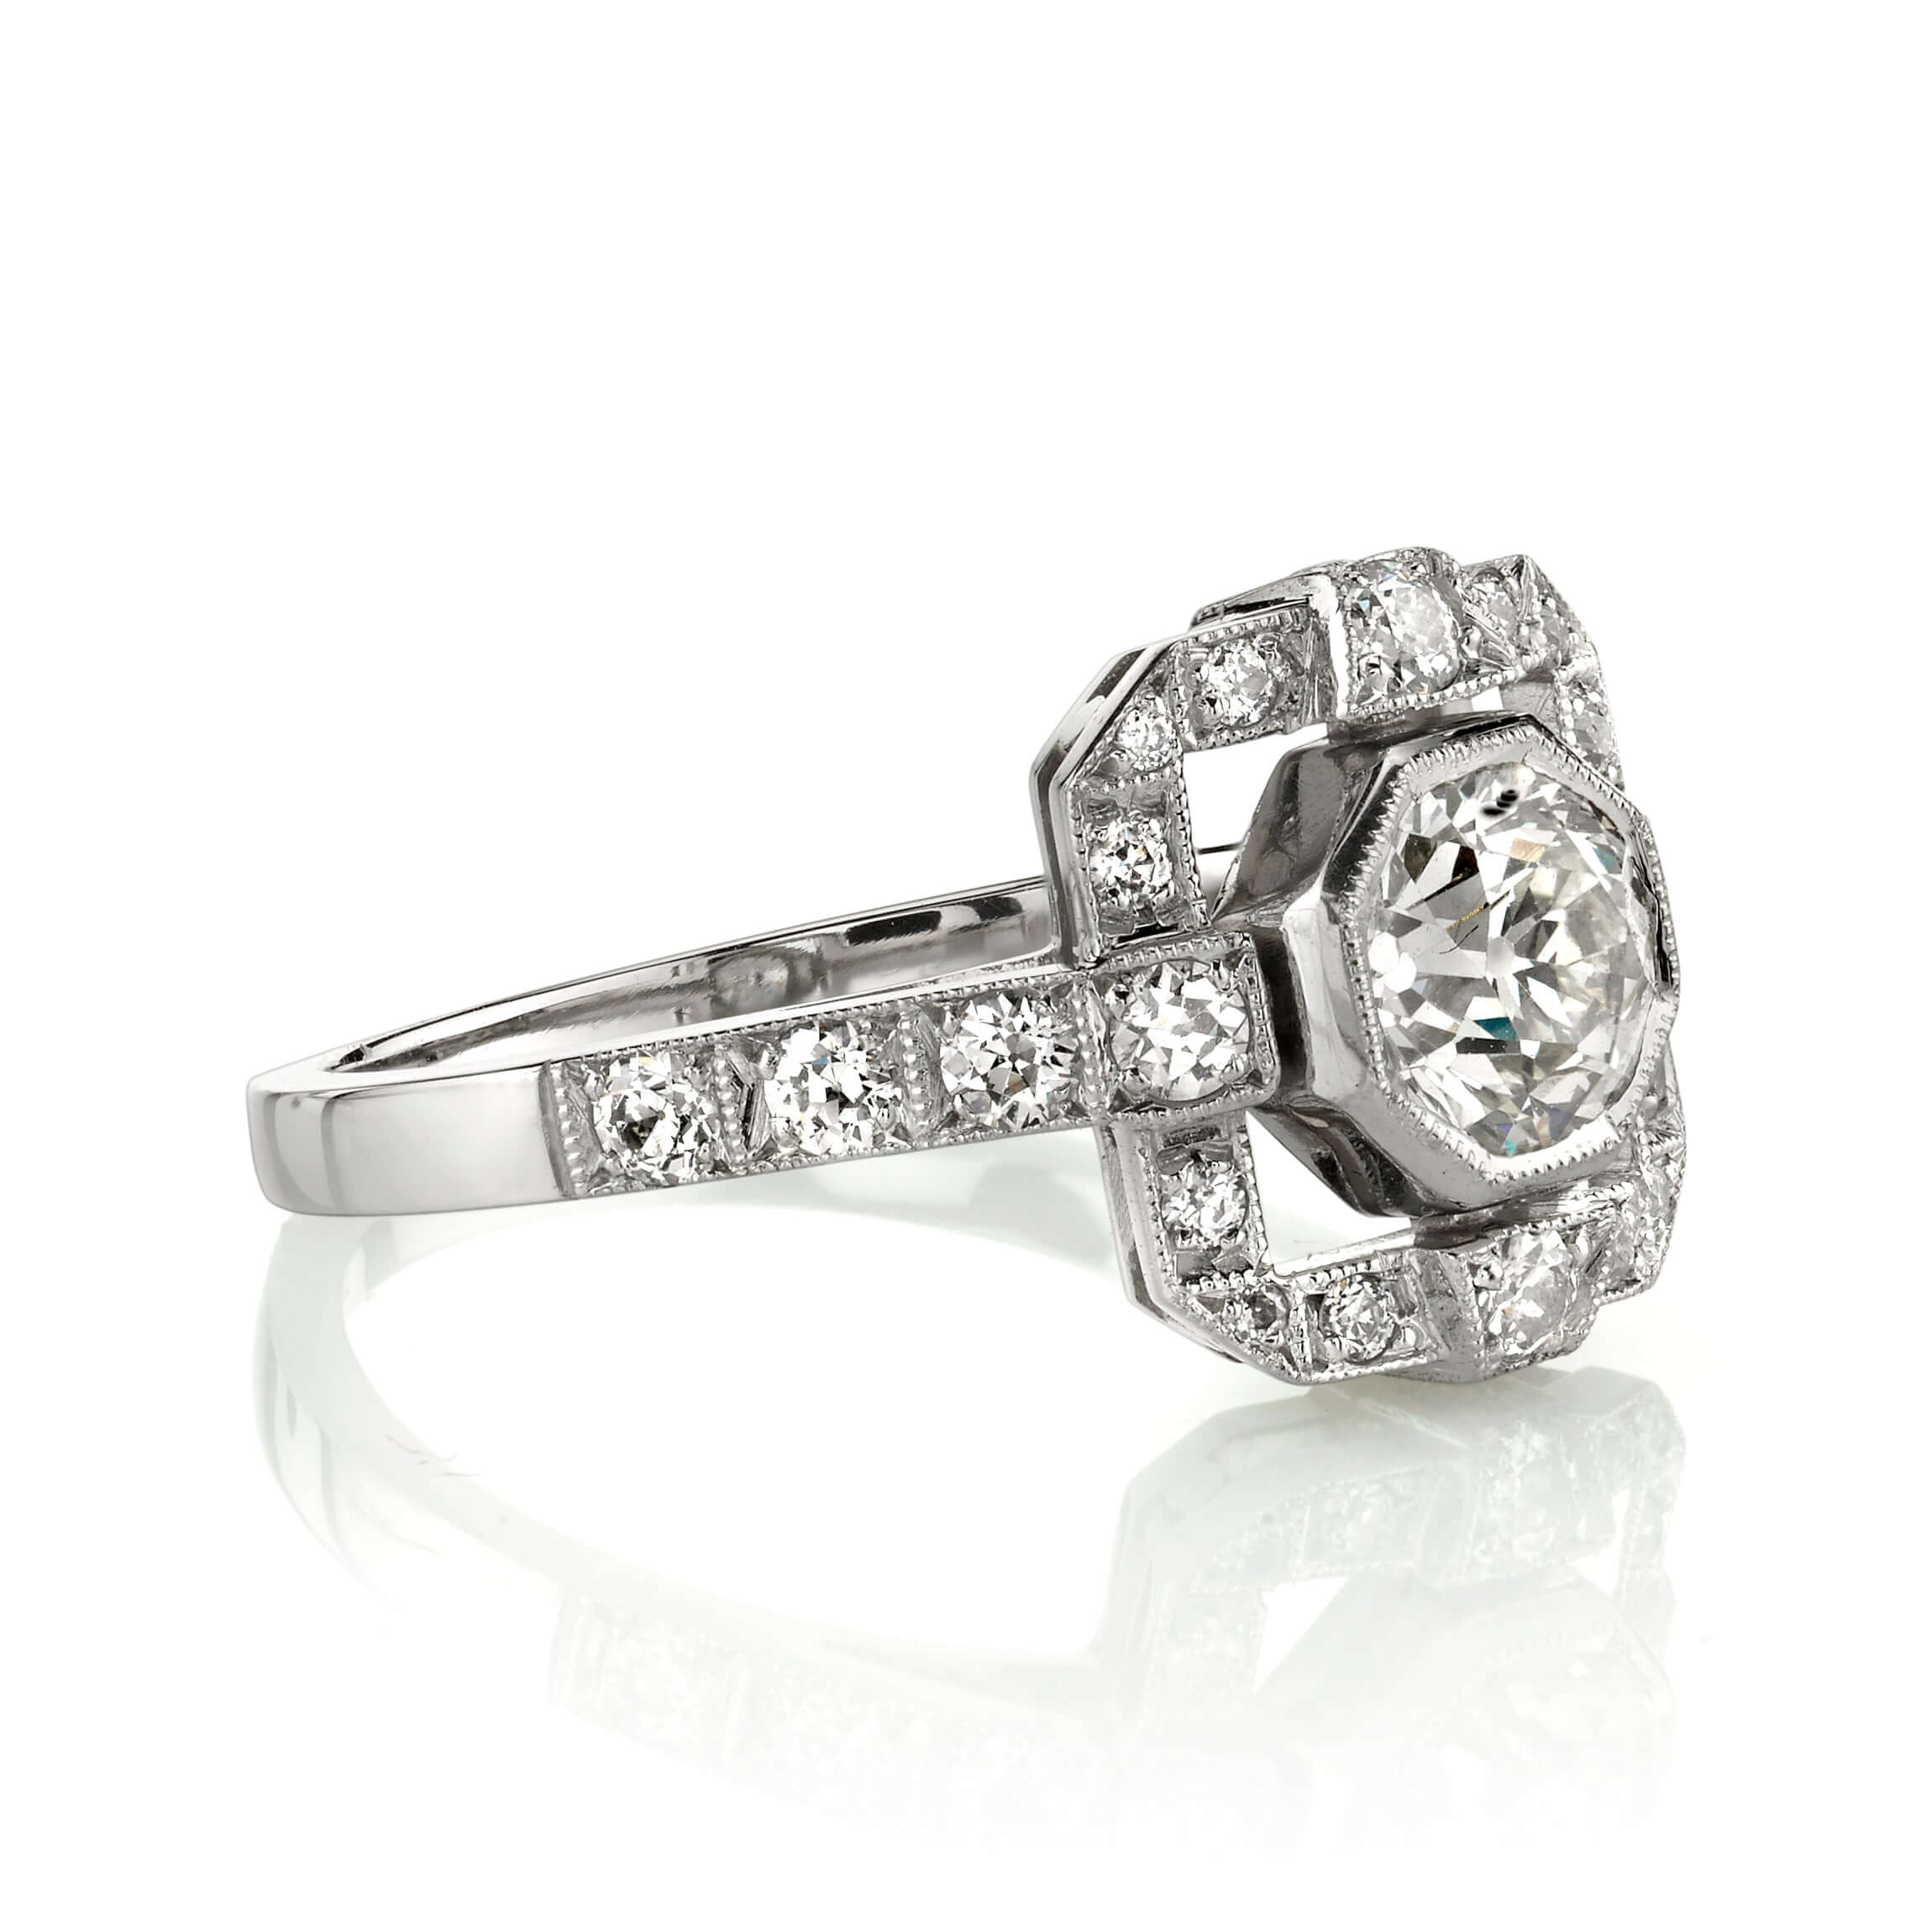 SINGLE STONE KATIE RING featuring 0.69ct K/VS2 GIA certified old European cut diamond with 0.35ctw old European cut accent diamonds set in a handcrafted platinum mounting.